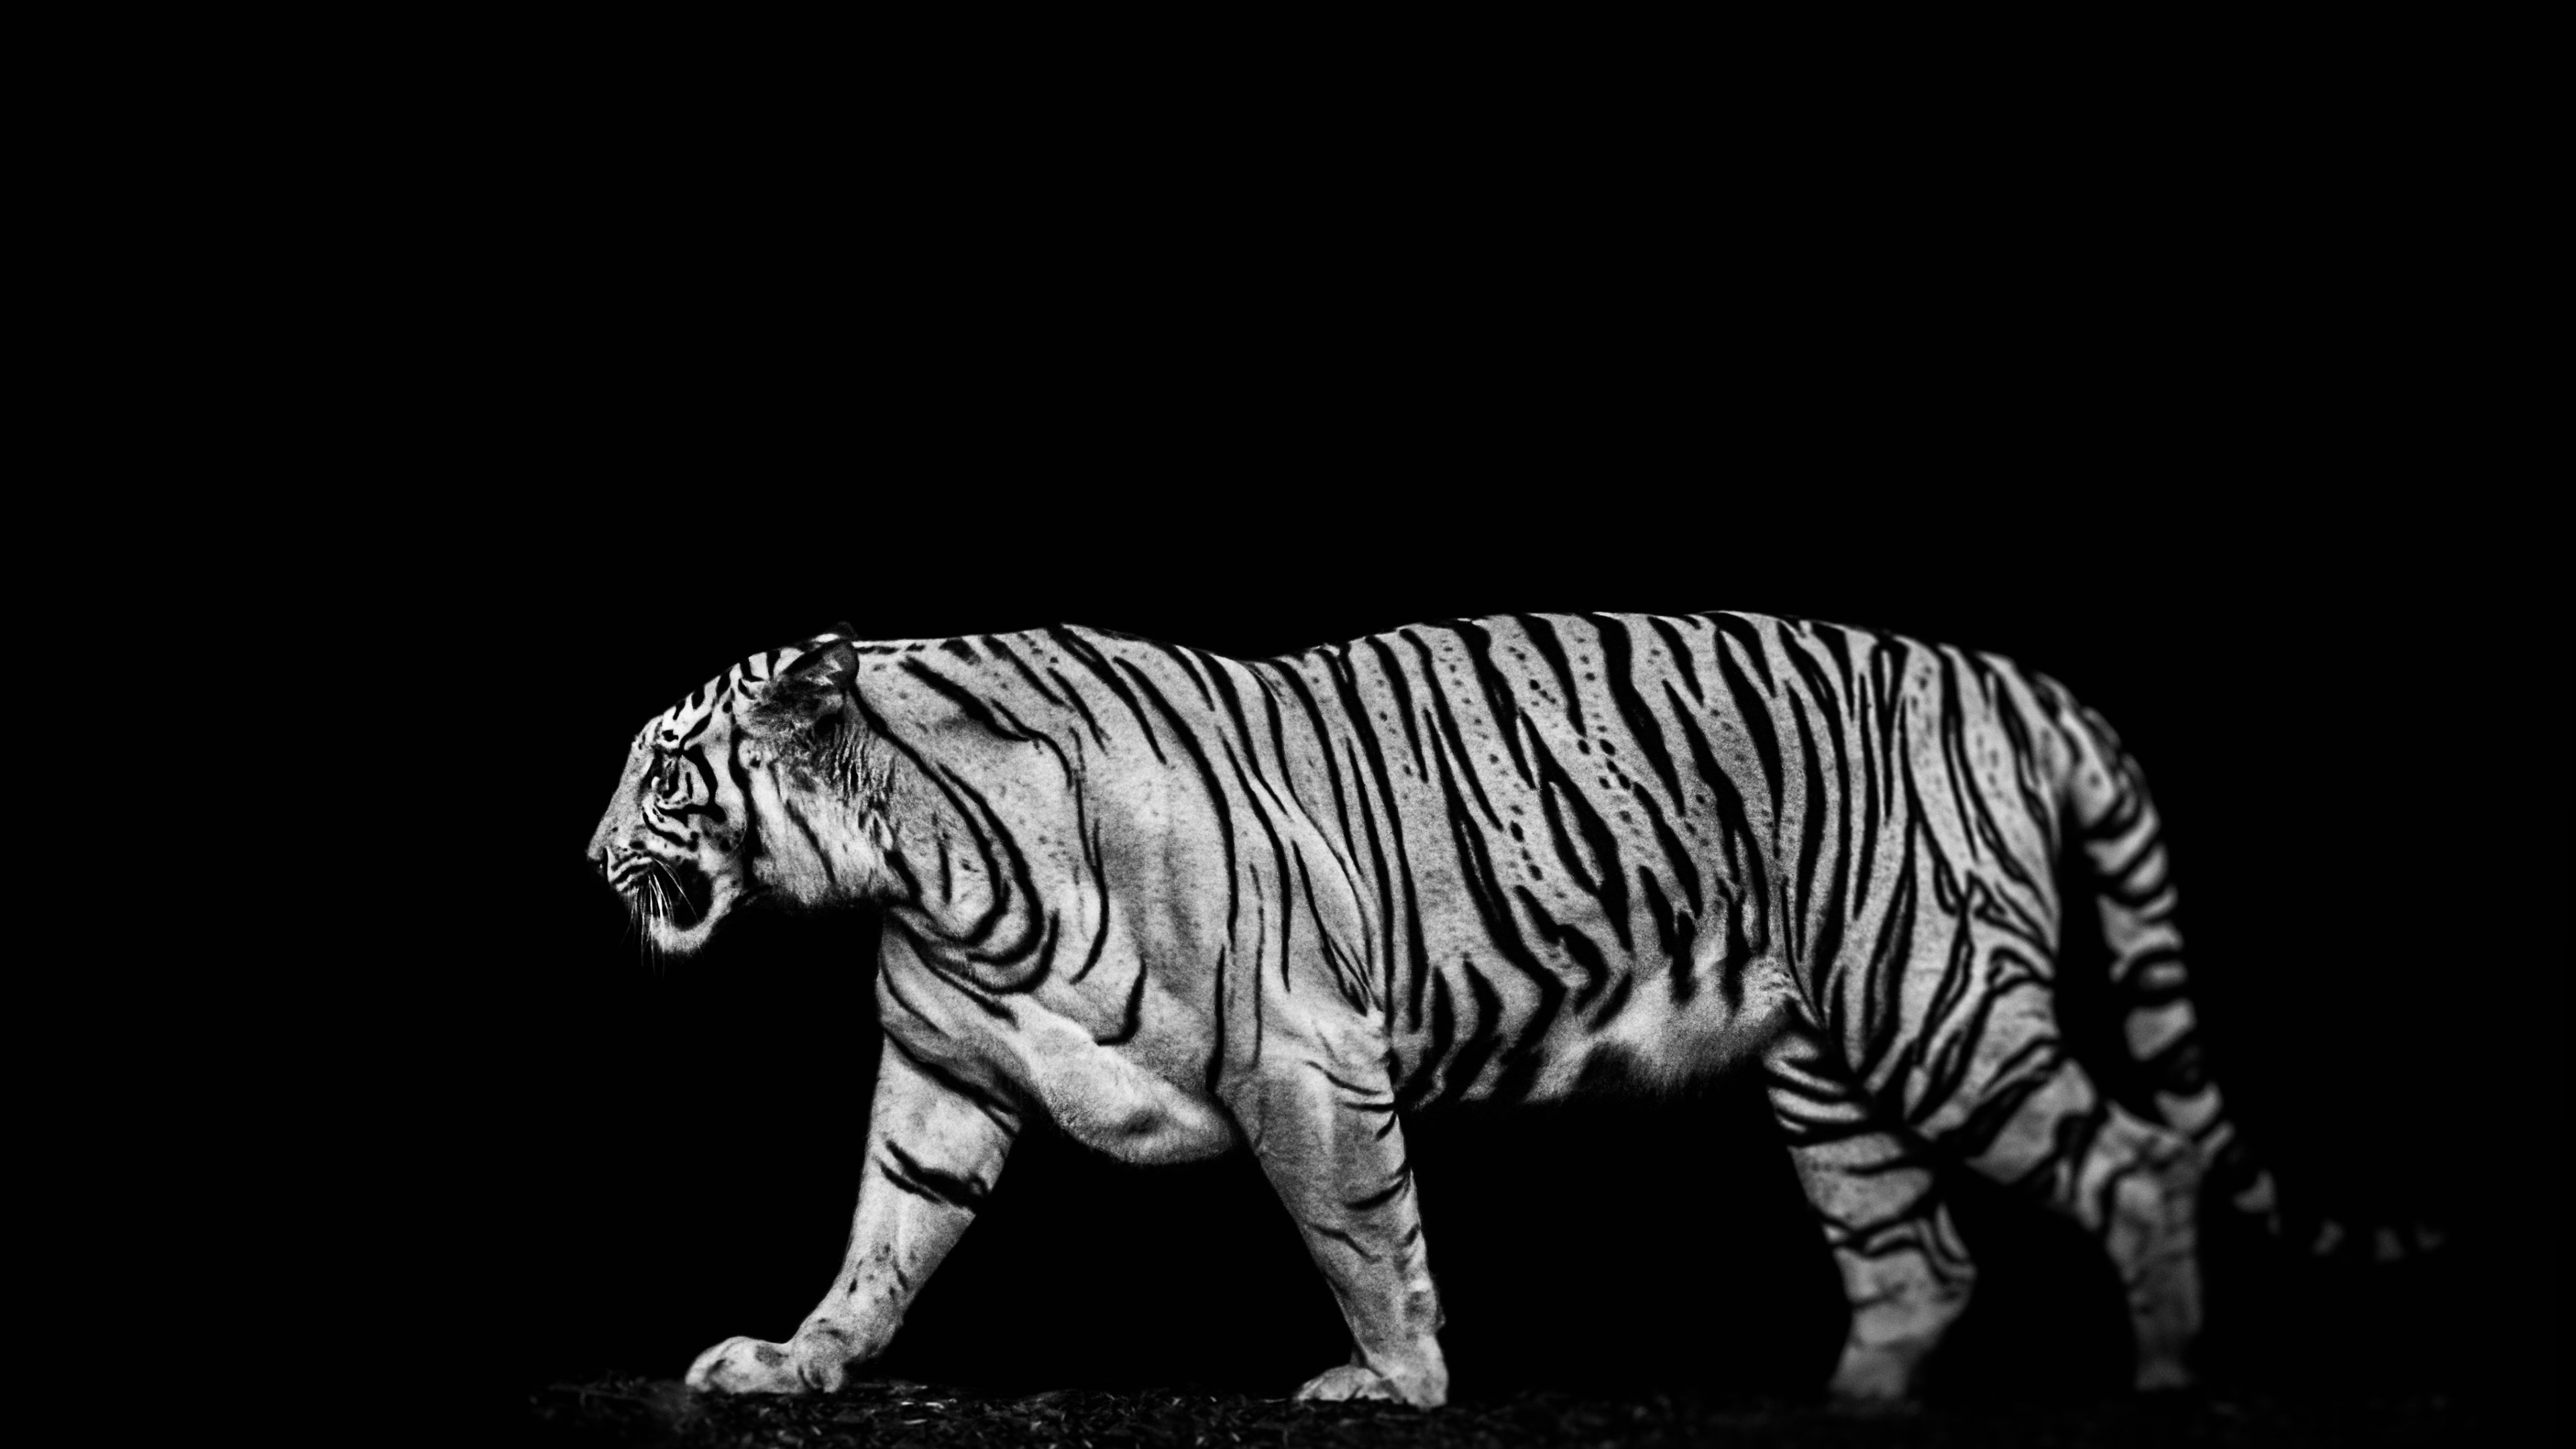 Tiger in the darkness wallpaper 3840x2160